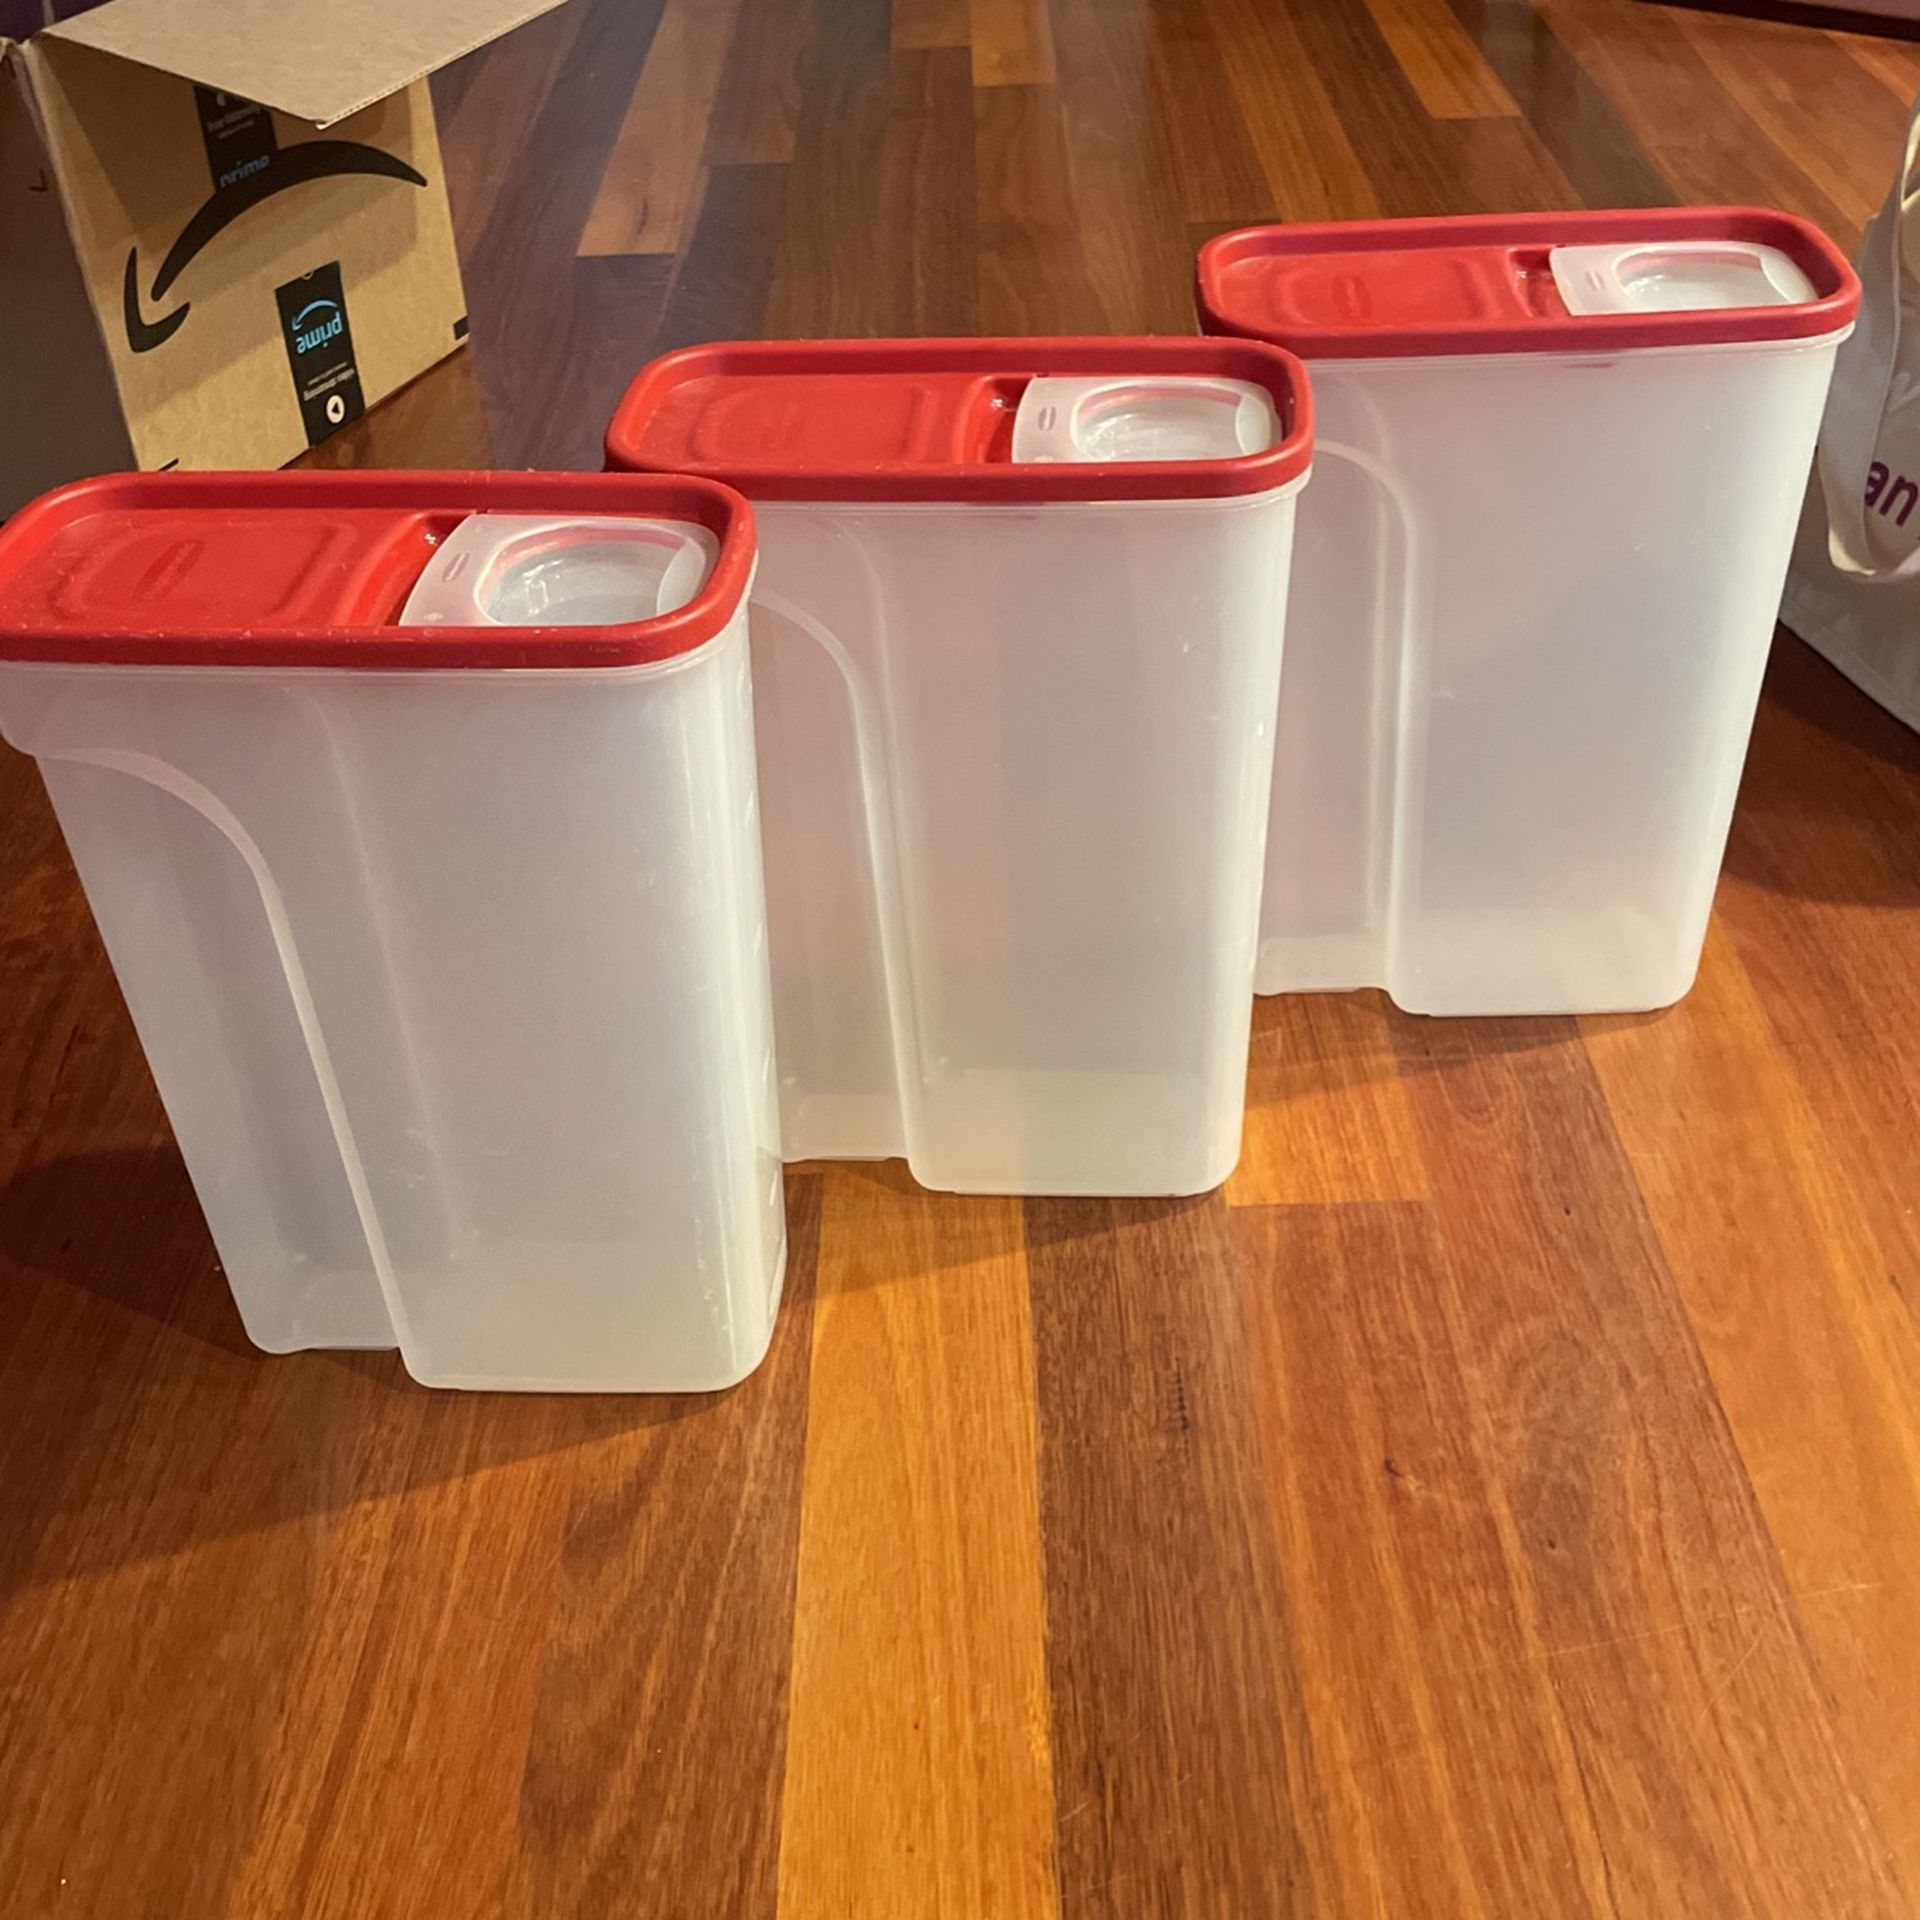 Three Rubbermaid Cereal Containers